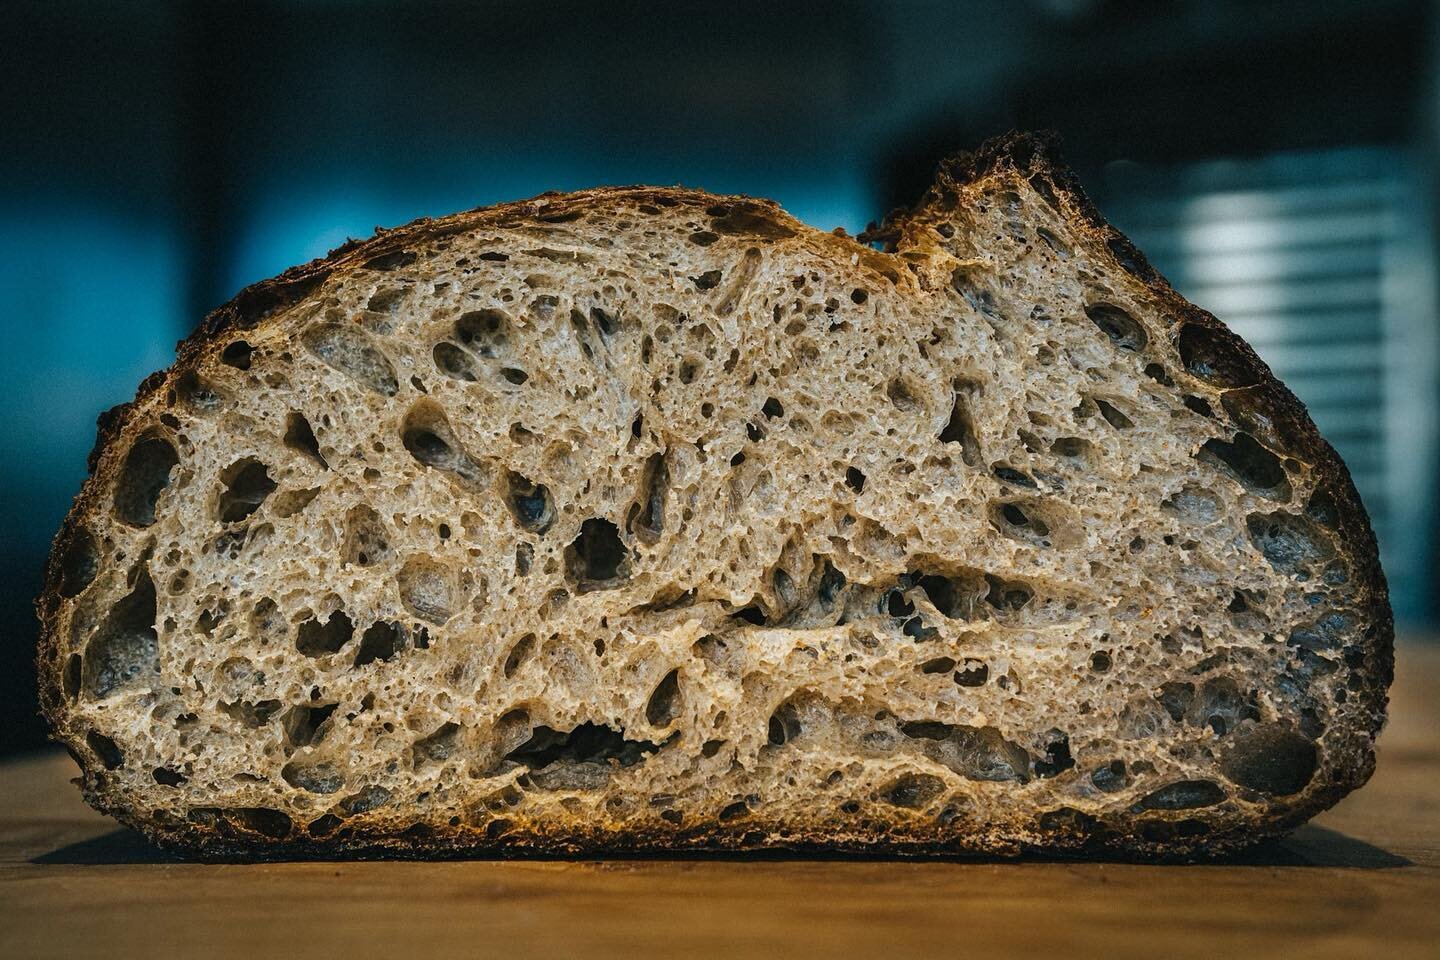 A real &ldquo;crumby&rdquo; photo. Happy 4rth Weekend! We are excited to see everyone at @lincolnstreetbakery, @landervalleyfarmersmarket, or in the evening for a Bar 223 libation. #dadjokes #crustandcrumb #sourdoughbread #landerwyoming #landerartdis